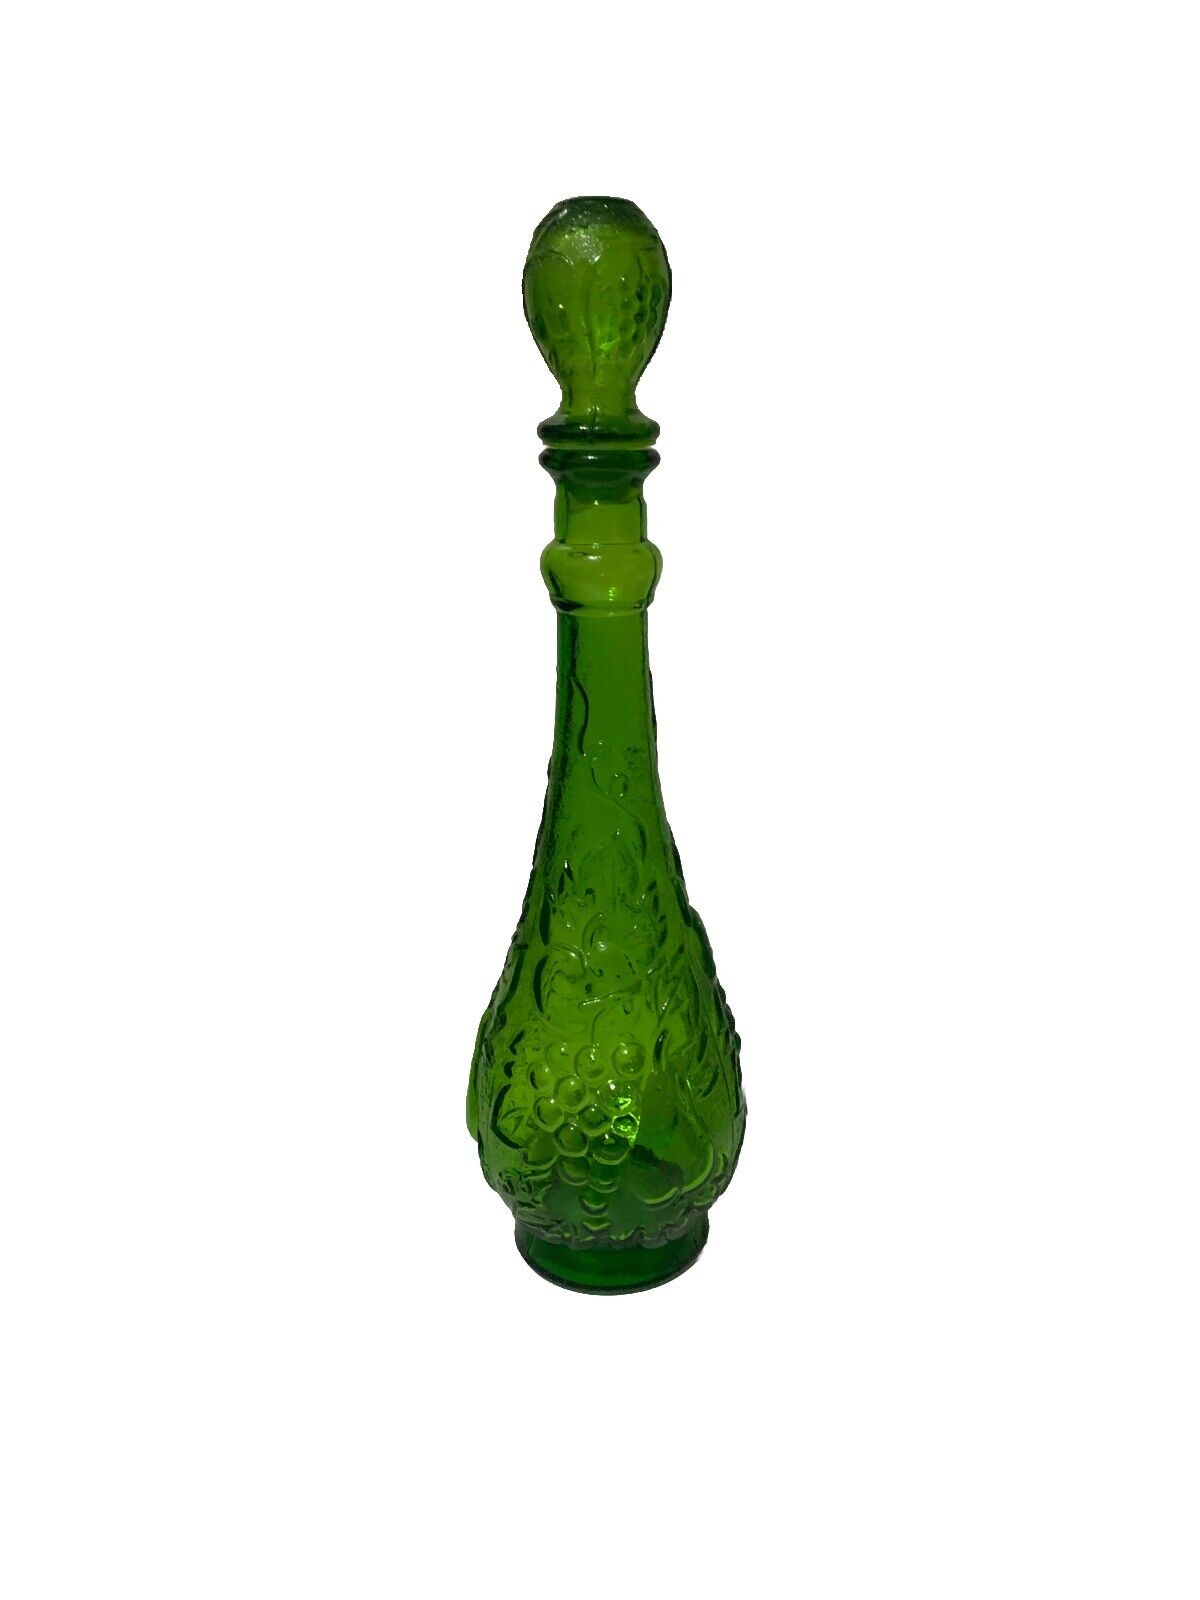 Vintage Italian  Green Glass Fruit Decanter With Stopper